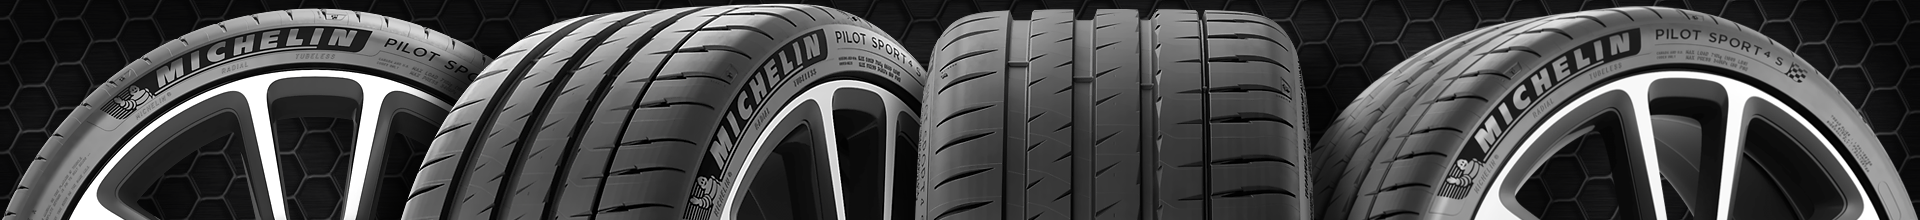 215 30 20 discount tires from Tire Outlet US